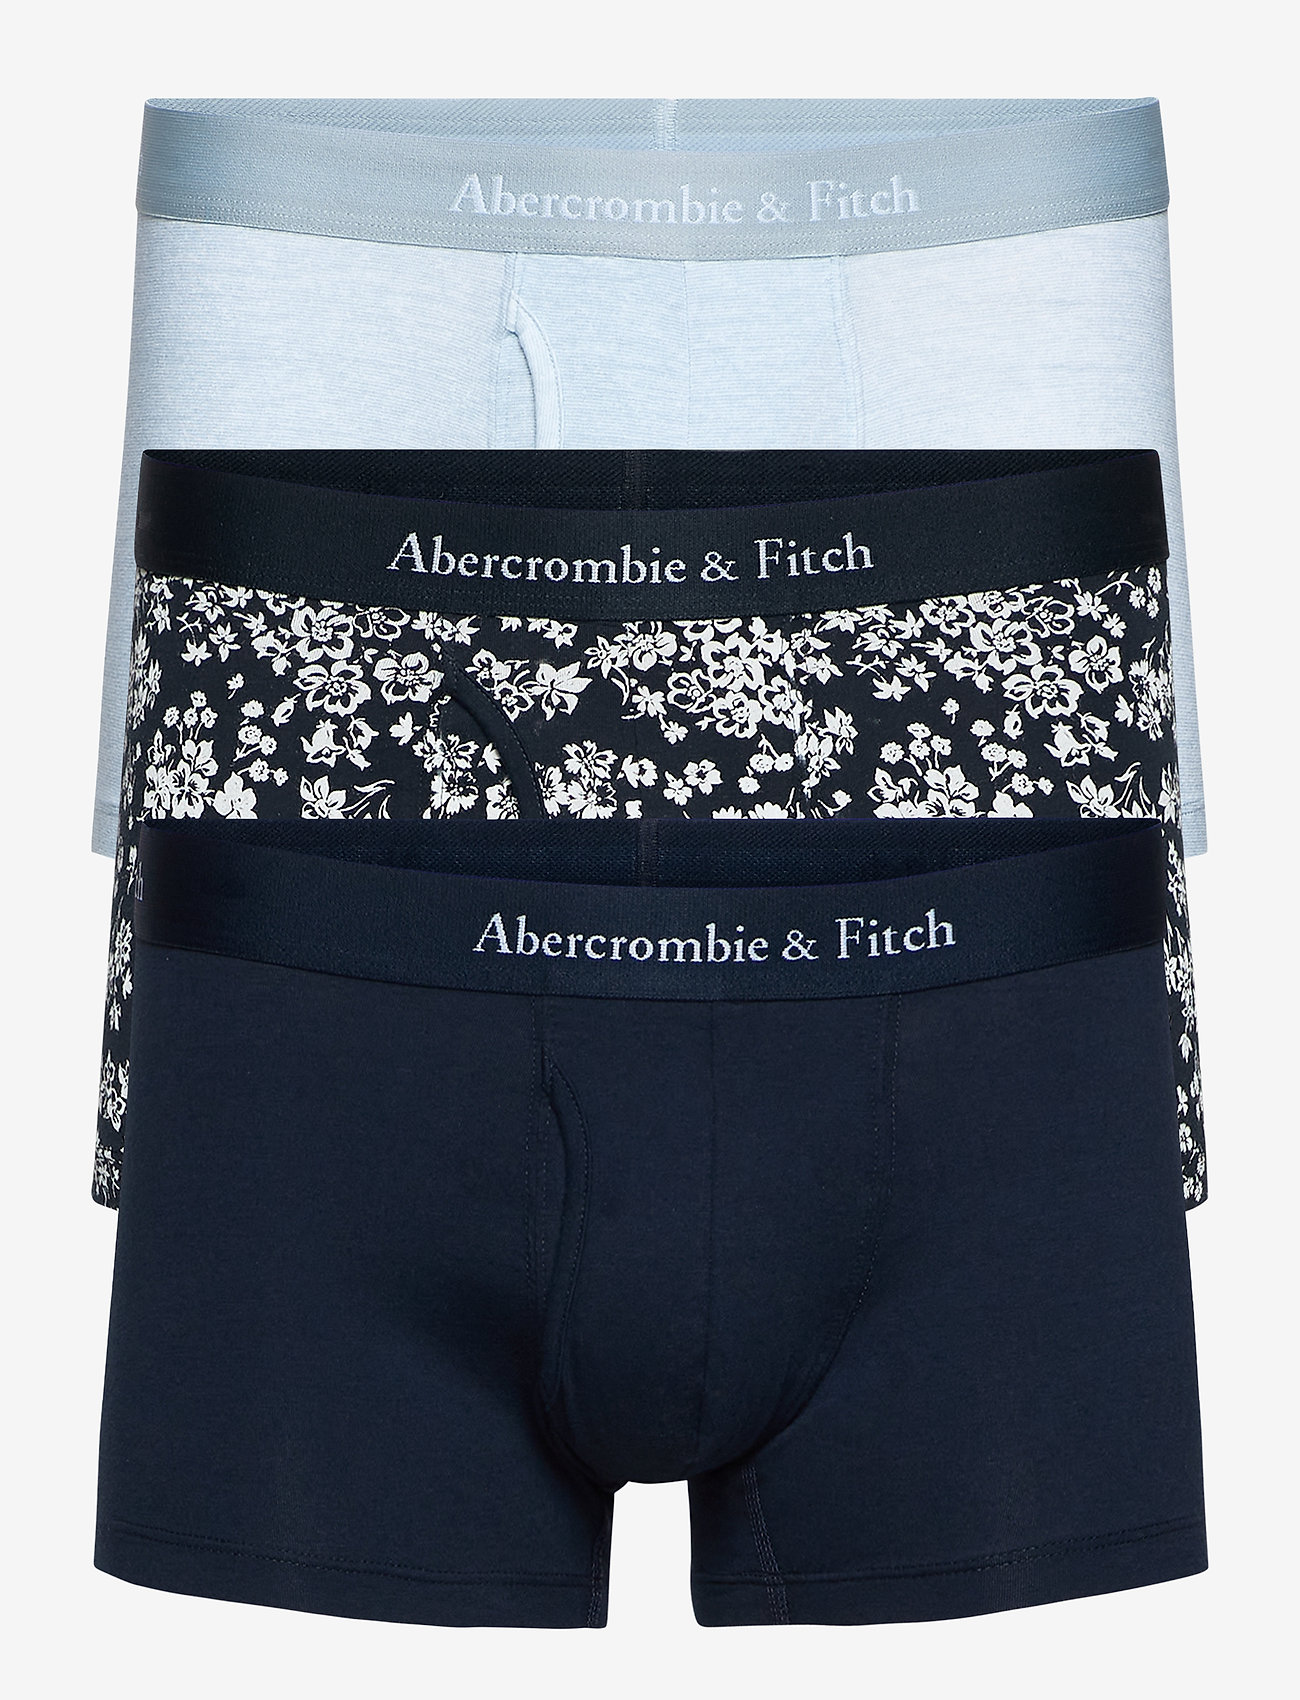 abercrombie & fitch trunks